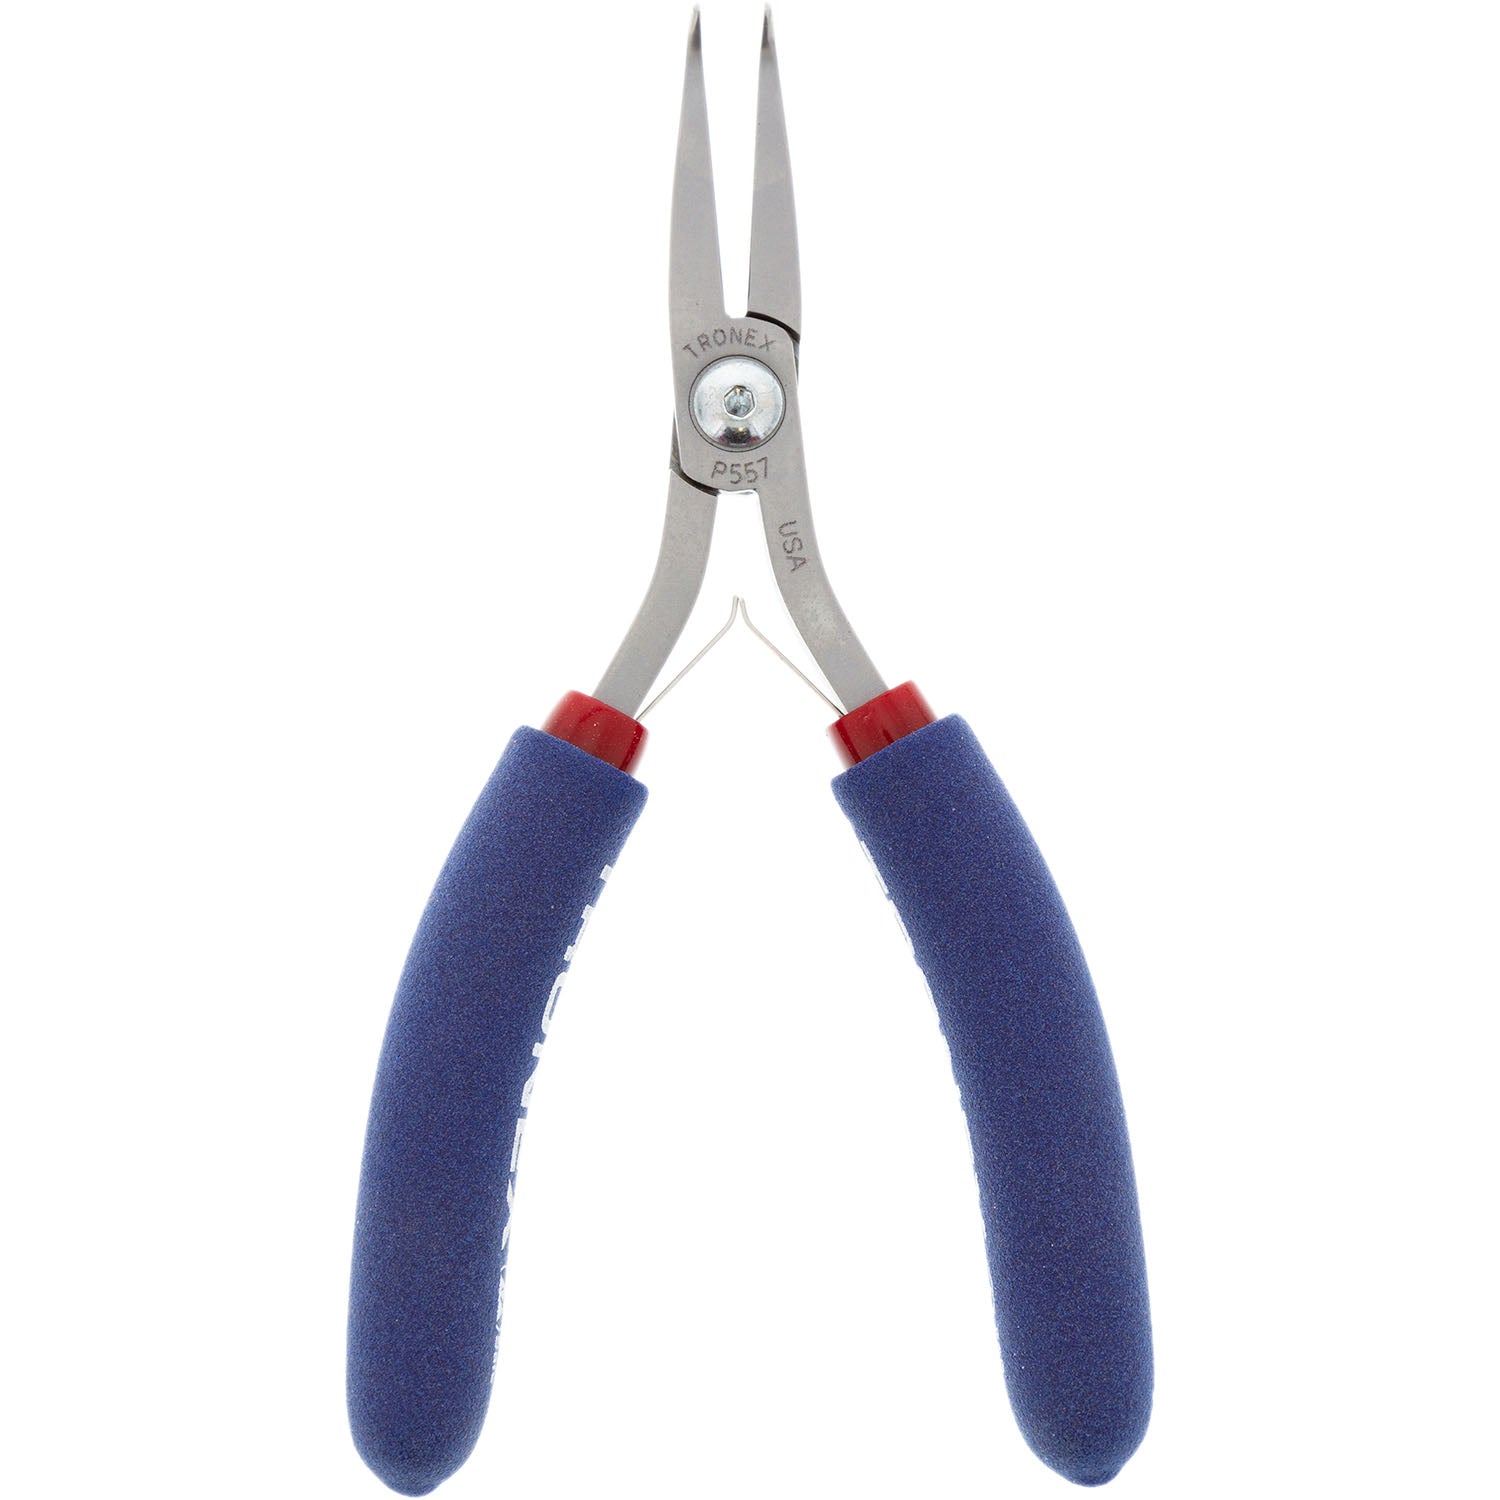 Tronex P557 Bent Nose Pliers with 60° Angled Long Jaw